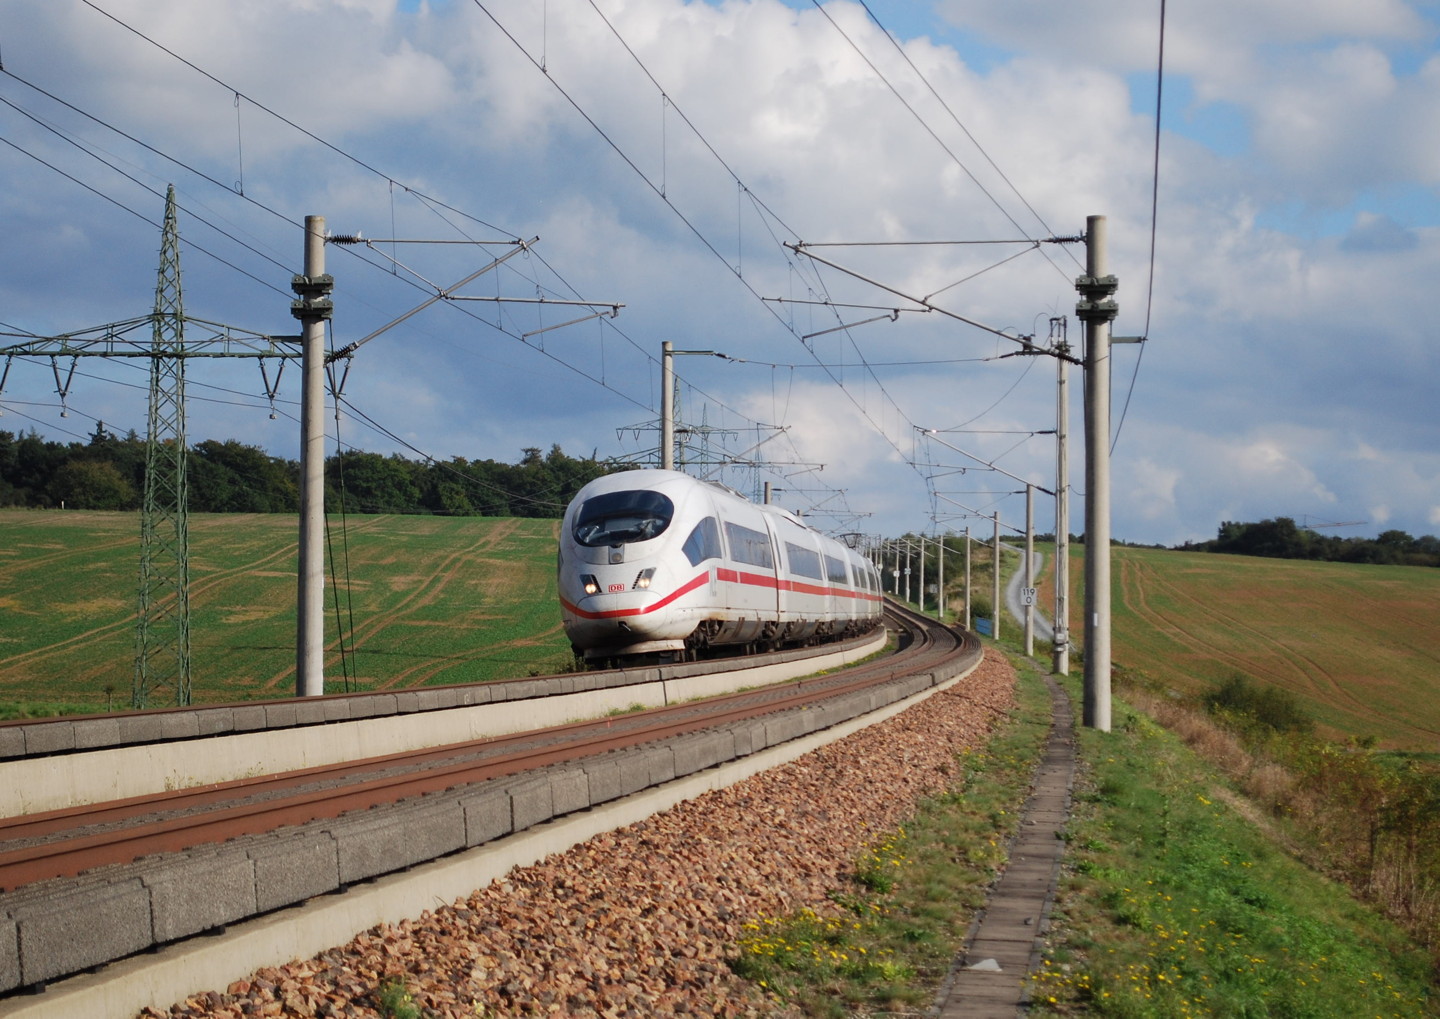 A German high-speed train is passing on the Frankfurt - Cologne high-speed line.